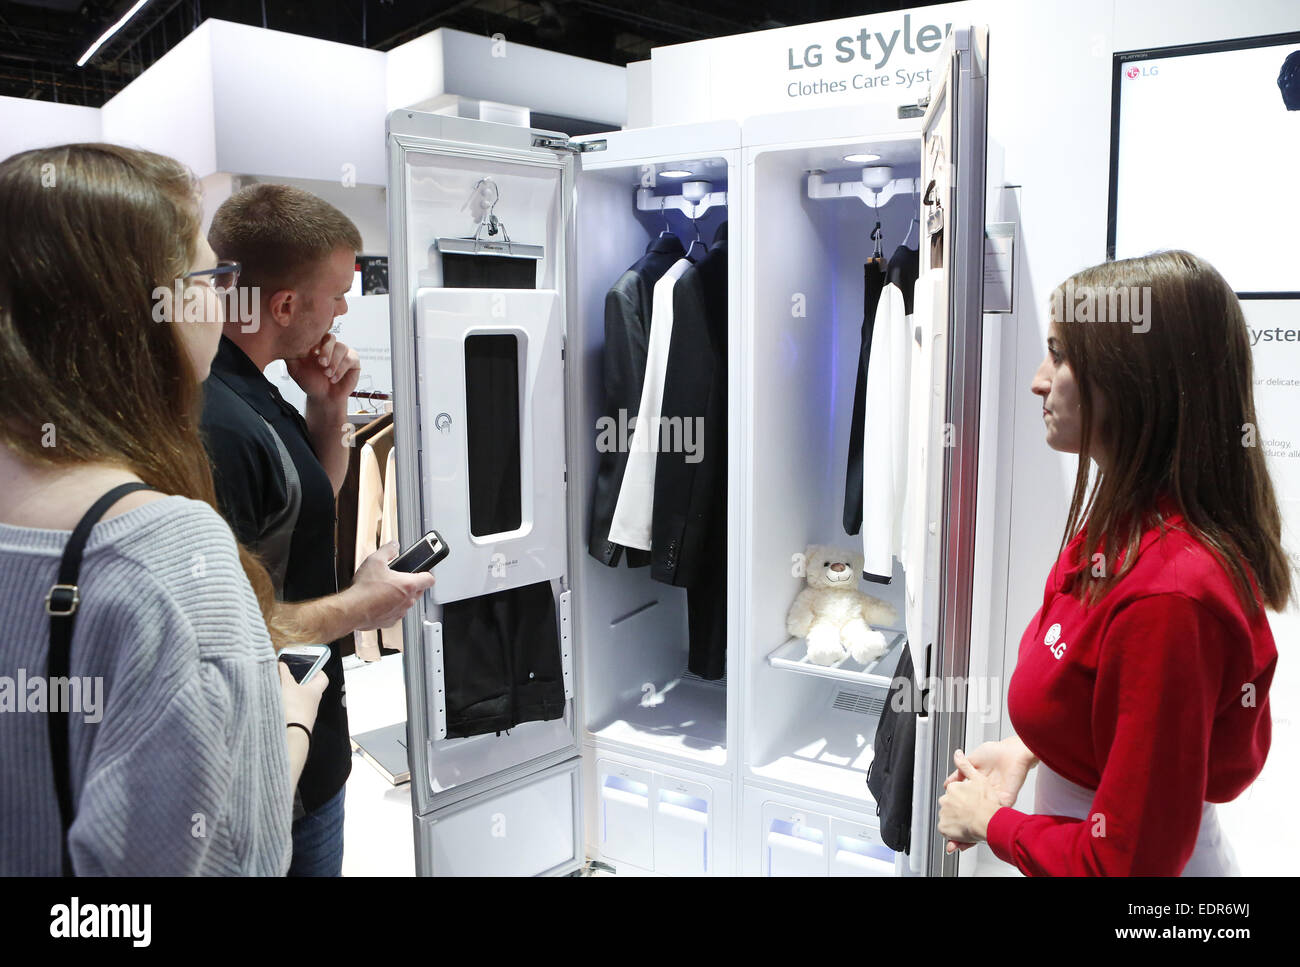 Las Vegas, Nevada, USA. 8th Jan, 2015. MICHELLE COHN, LG's brand ambassador, right, talks about LG's Clothes Care System at Las Vegas Convention Center during the 2015 International CES on Thursday, Jan. 8, 2015. LG Styler is designed to refresh clothes without water or detergents, providing an ideal solution for hard-to-maintain clothes such as suits, coats and sweaters. Credit:  Bizuayehu Tesfaye/ZUMA Wire/ZUMAPRESS.com/Alamy Live News Stock Photo